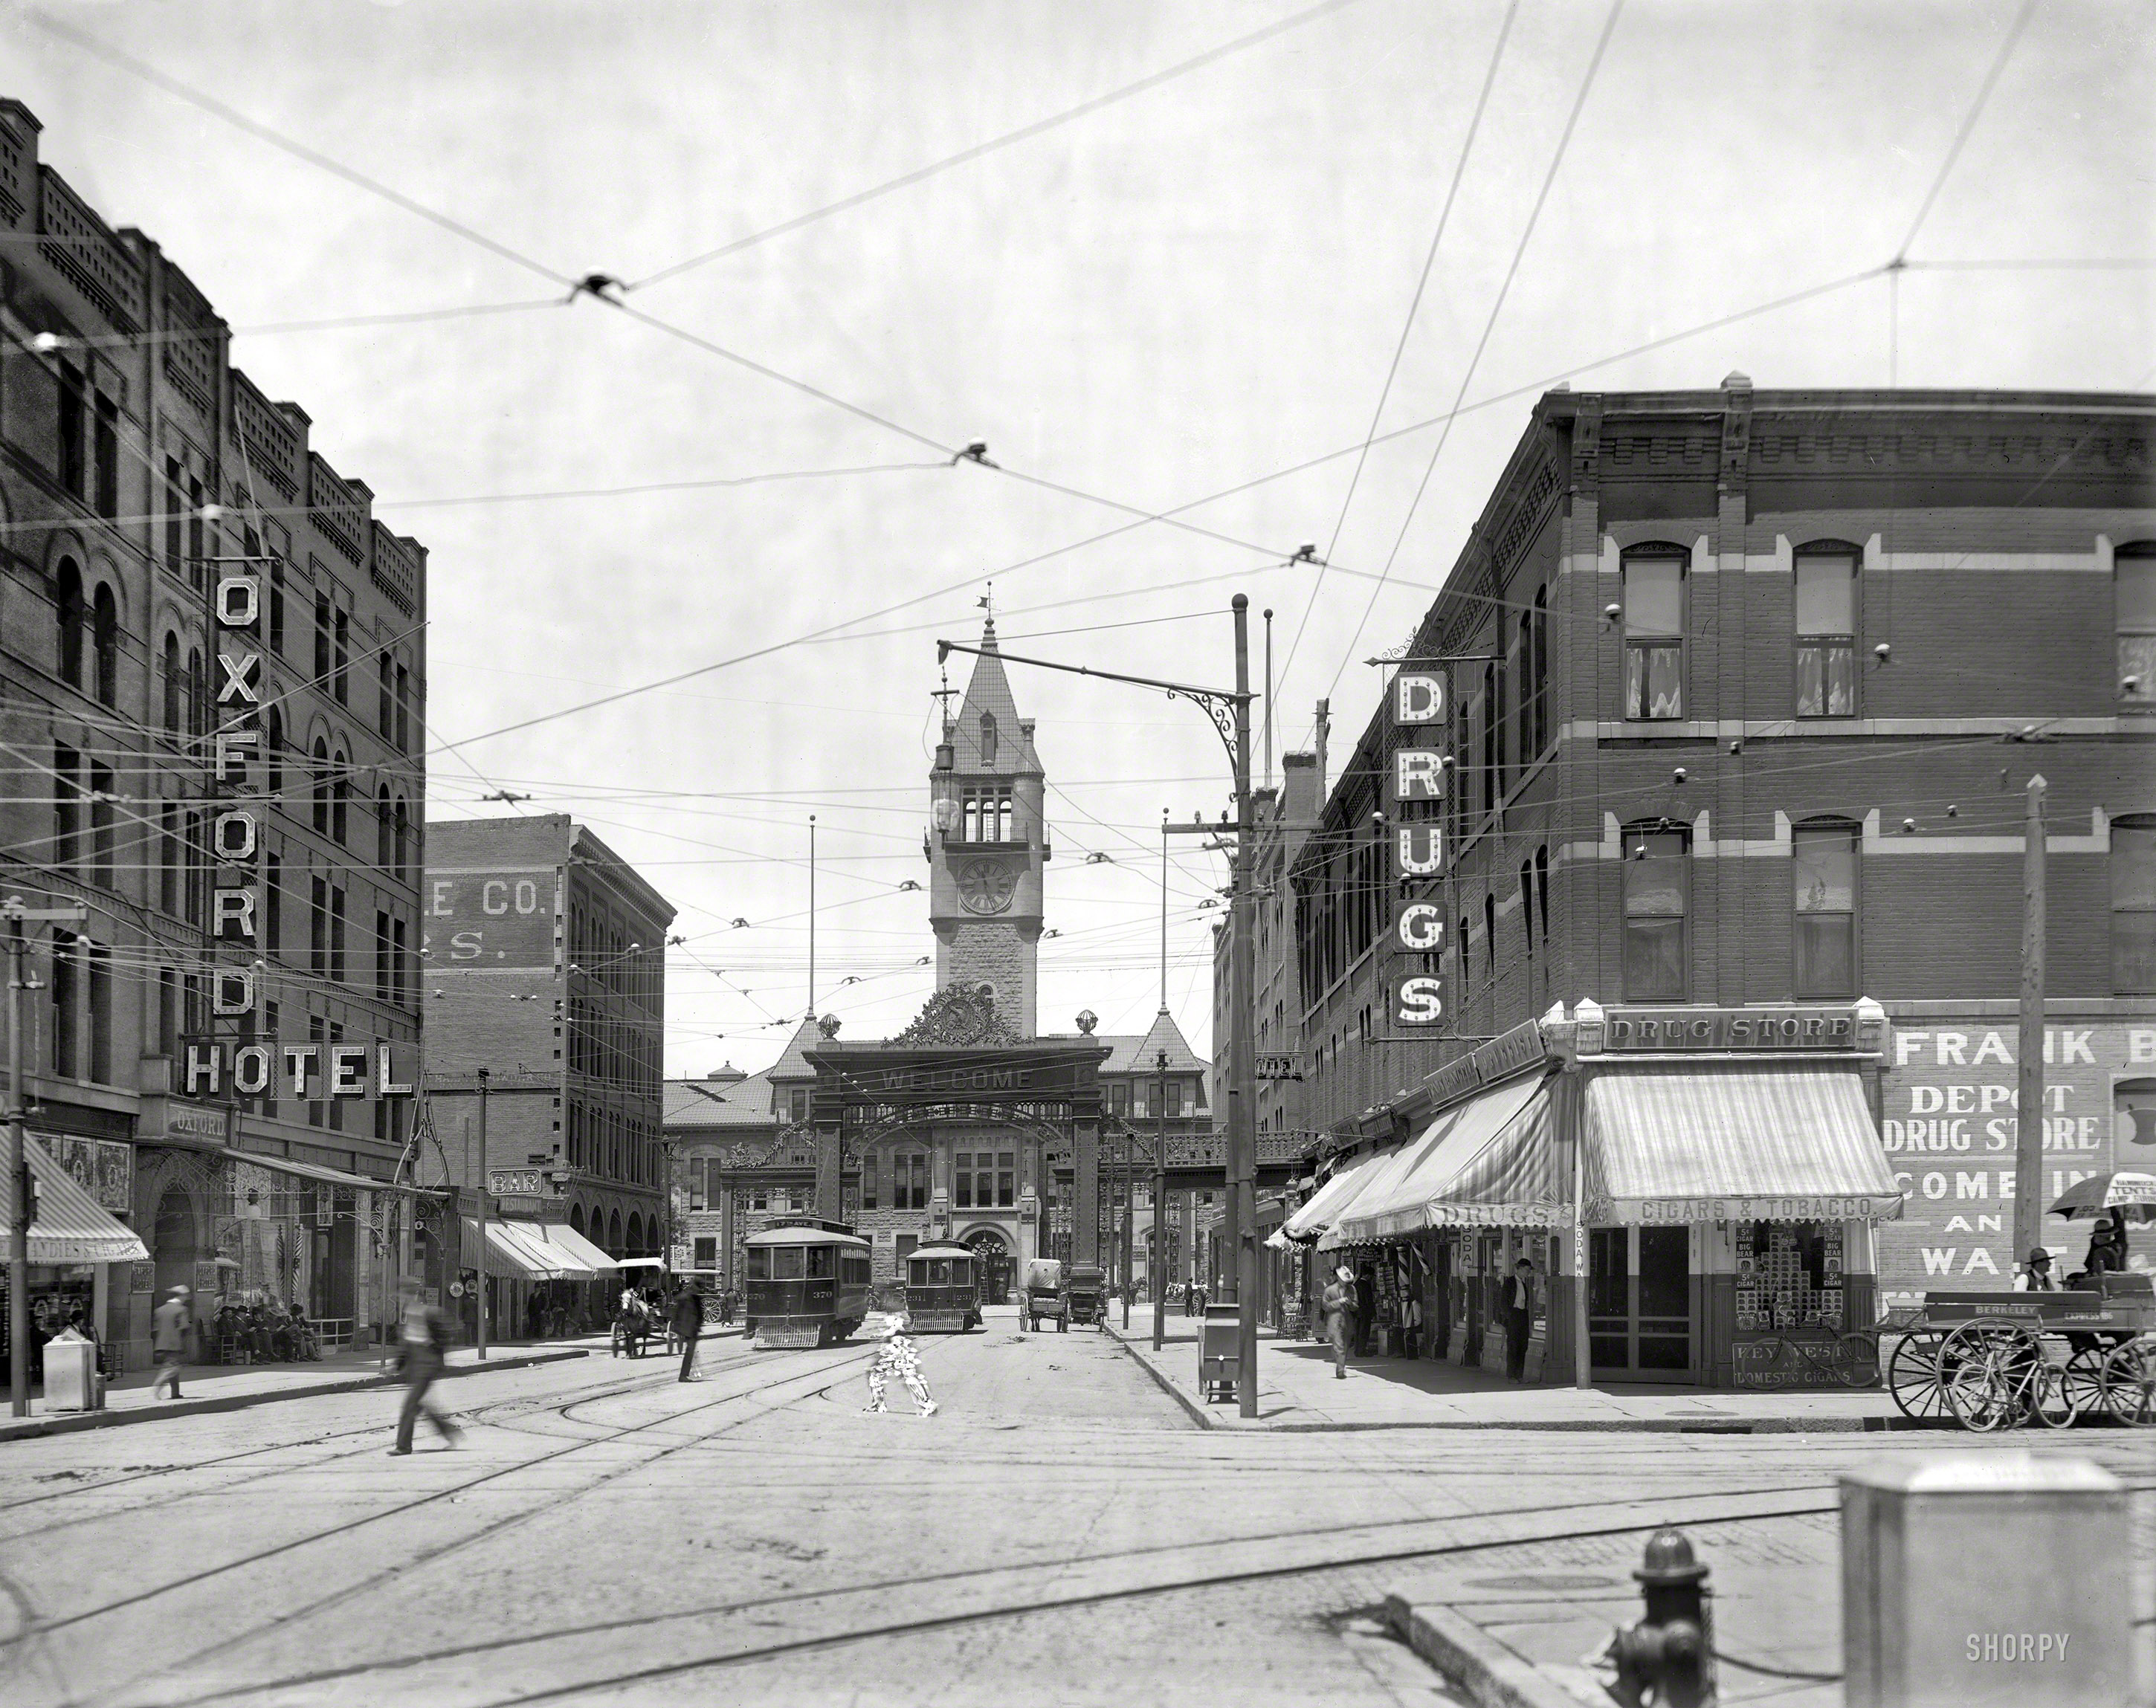 &nbsp; &nbsp; &nbsp; &nbsp; Click here for a view of the arch from the depot.
Denver, Colorado, circa 1908. "Welcome arch and Union Depot." Where blurry pedestrians risk the retoucher's brush. 8x10 glass negative. View full size.